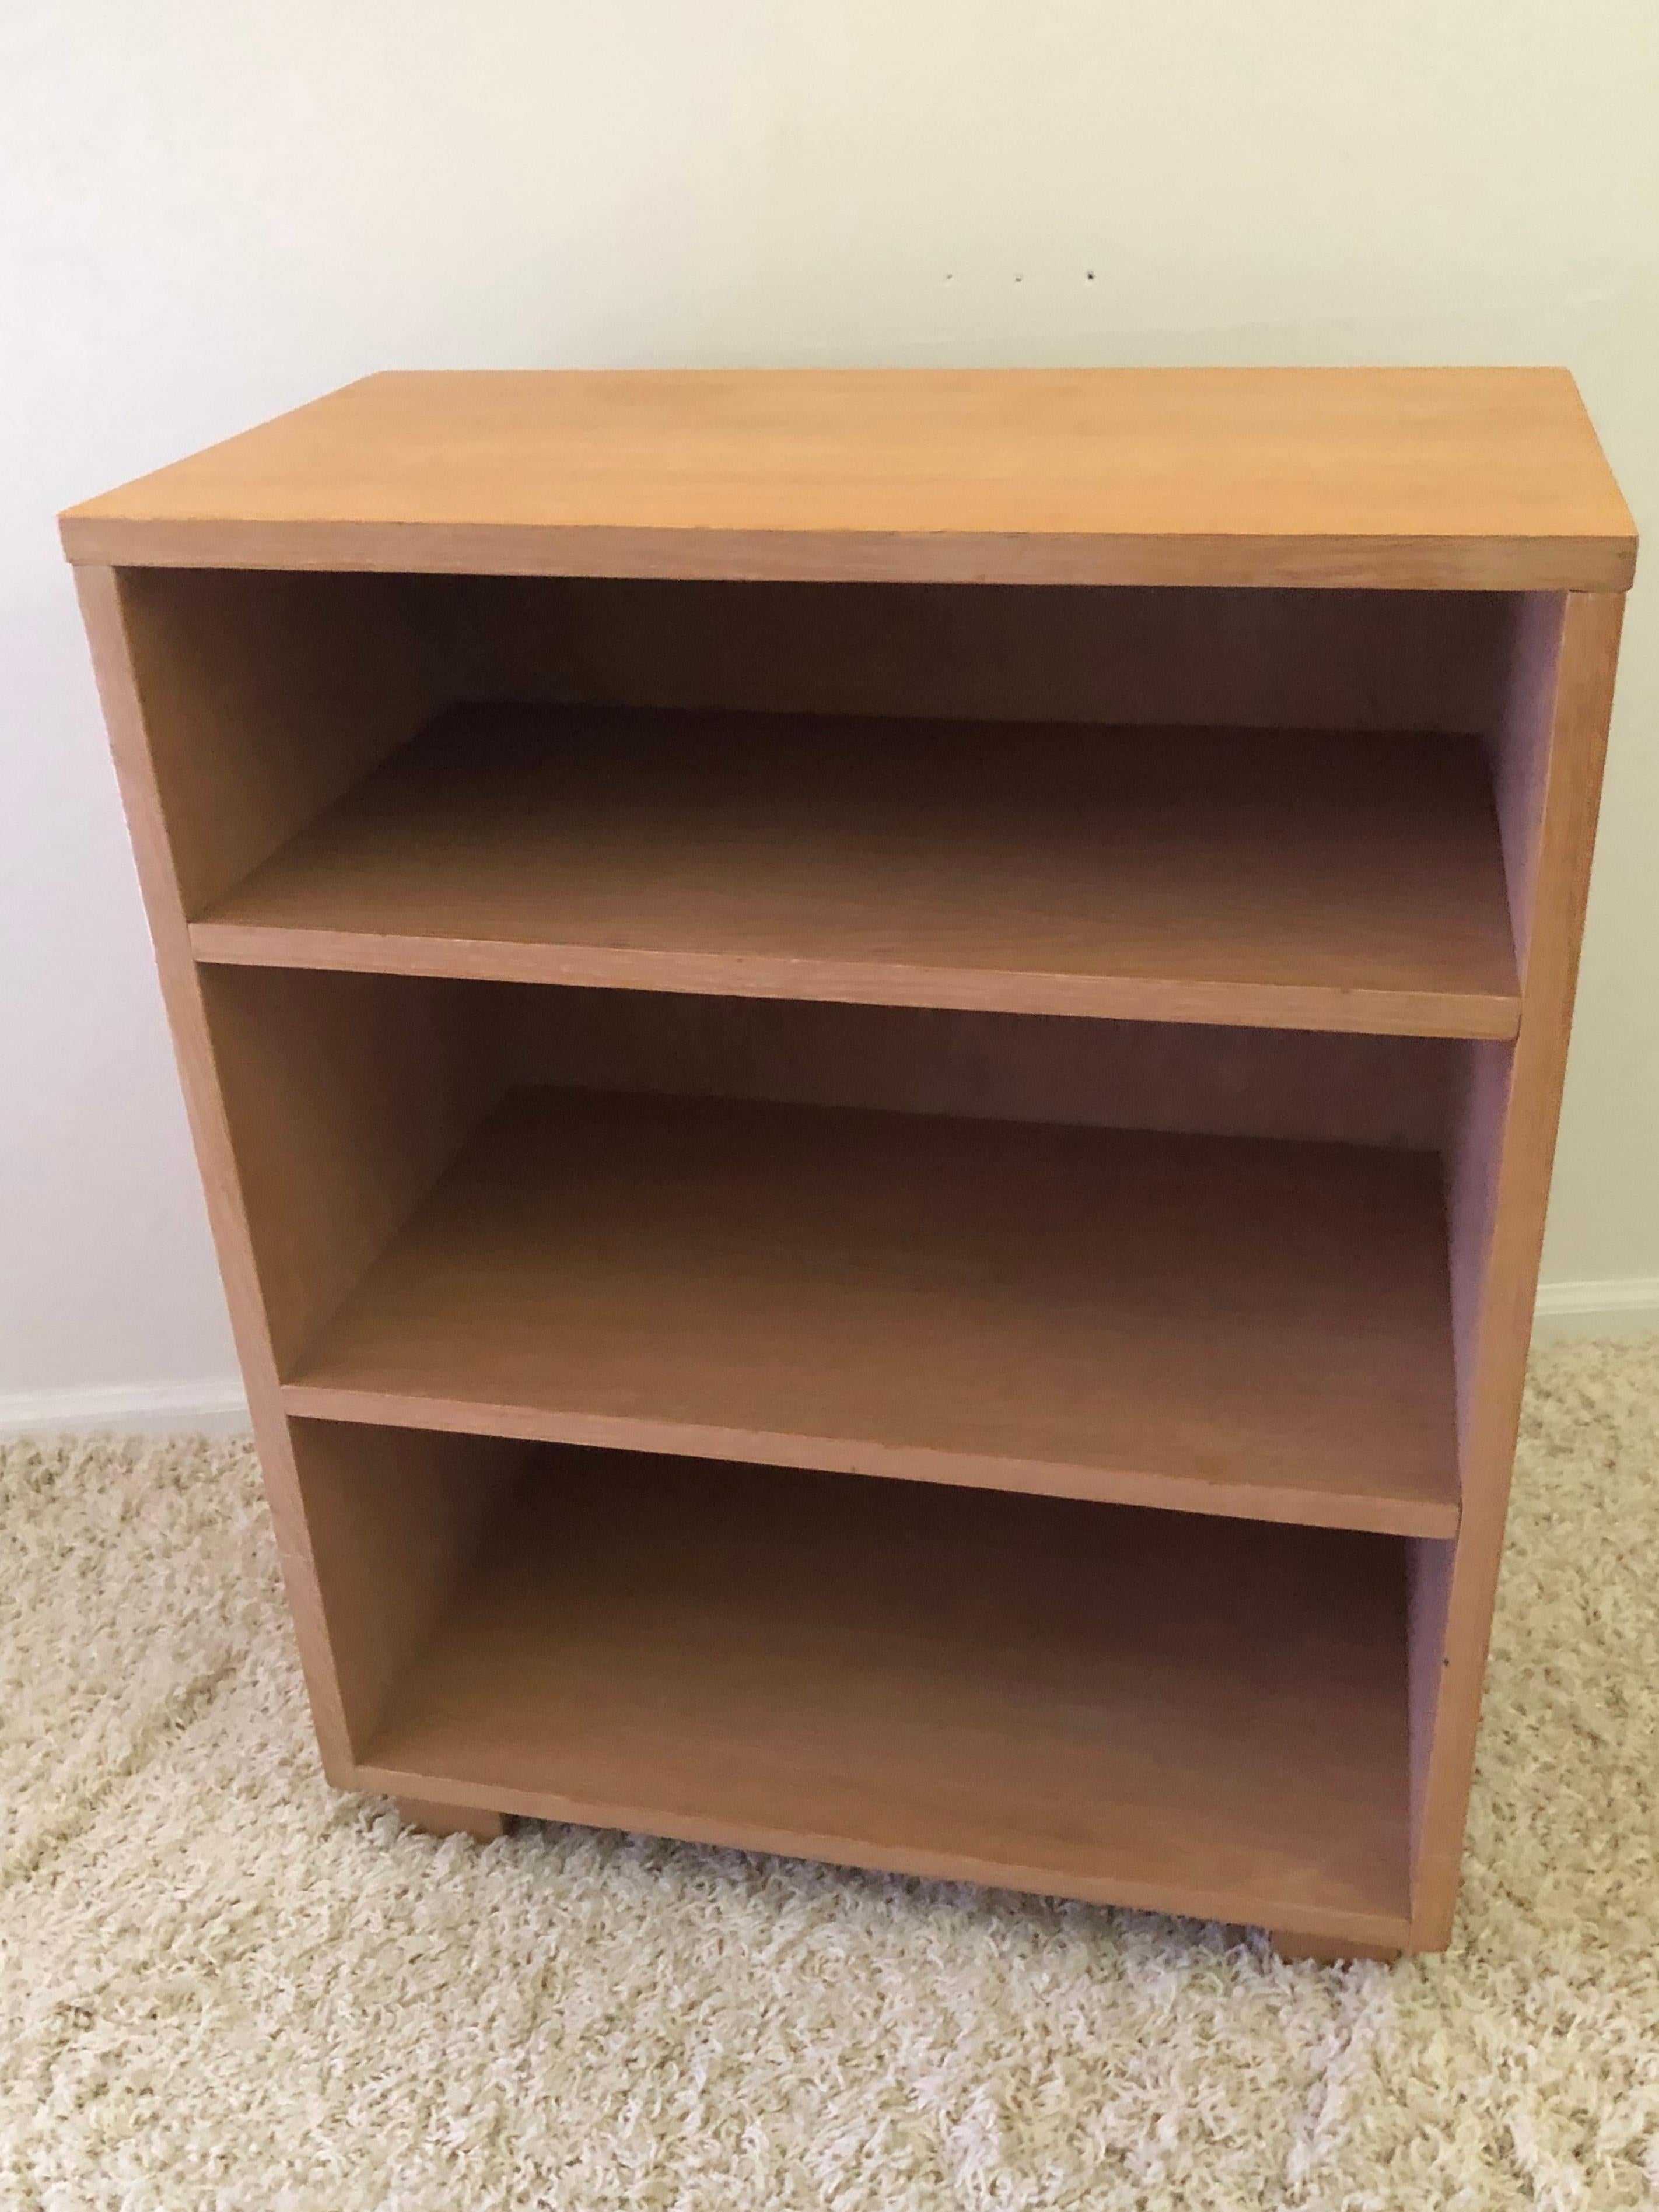 Petite Mid-Century Modern bleached oak limed, three shelf bookcase / display storage shelf book case. In original very nice condition Cerused creamy bleached golden oak finish. Great apartment size.